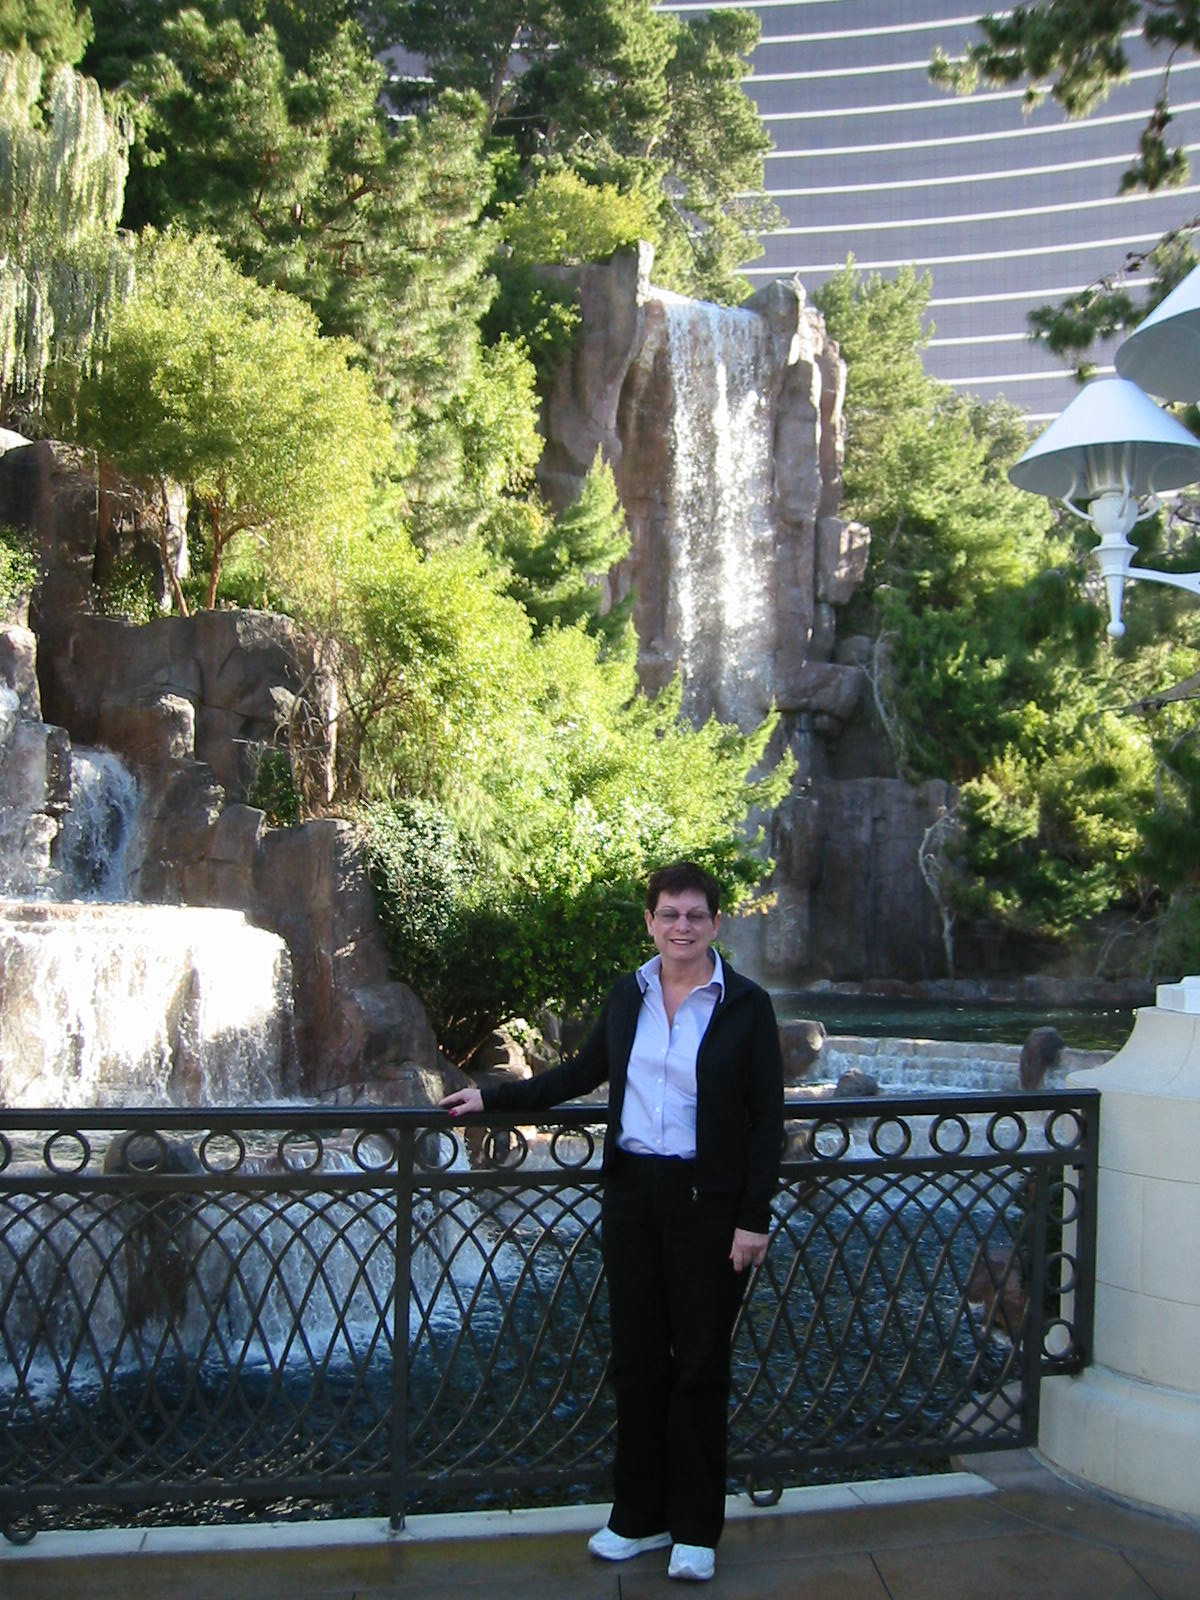 Wynn Hotel, Las Vegas, out front showing the falls